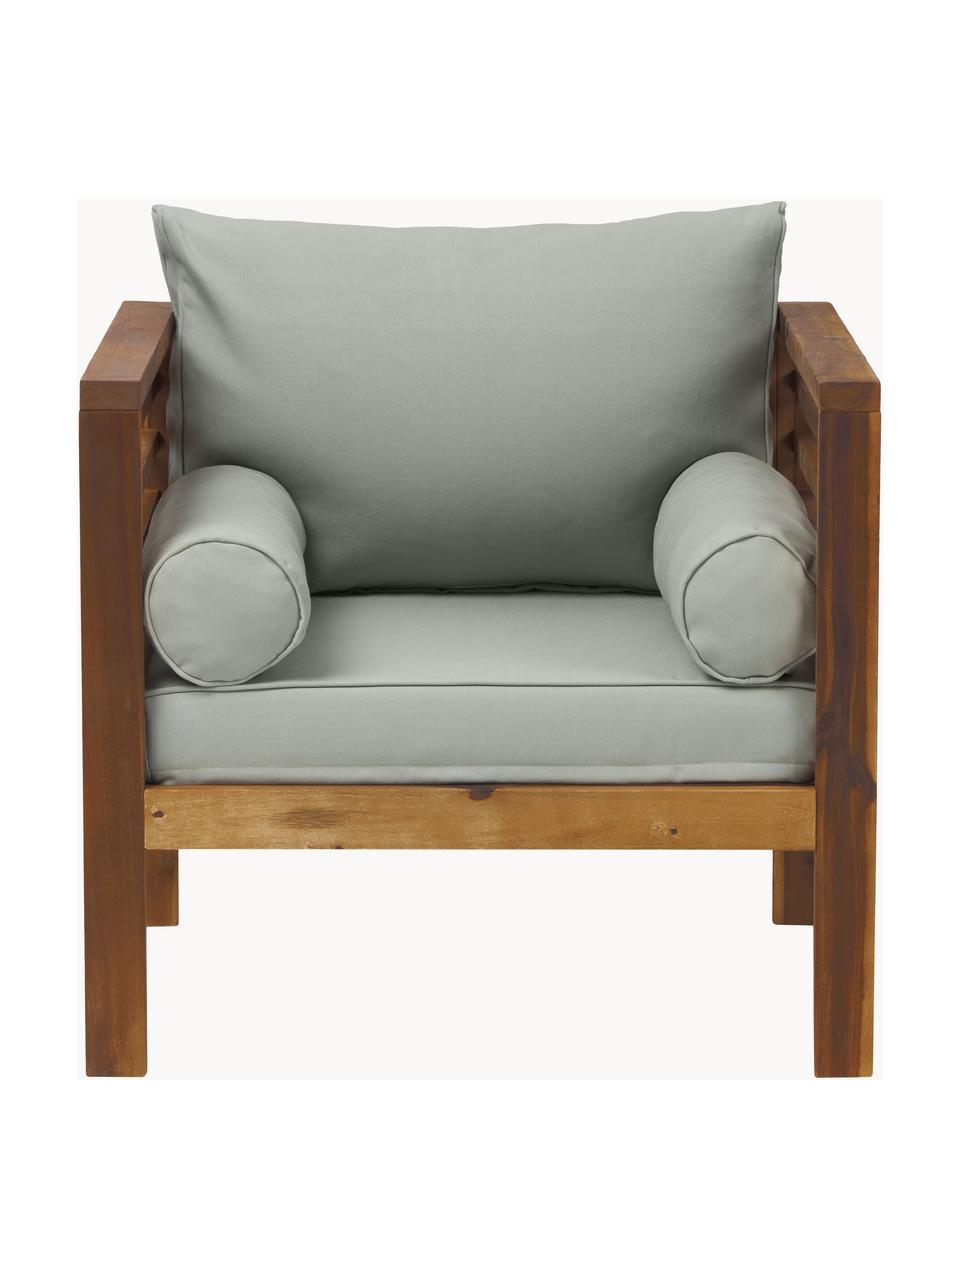 Tuin loungefauteuil Bo, Frame: massief geolied acaciahou, Donker hout,grijs, B 72 x H 64 cm